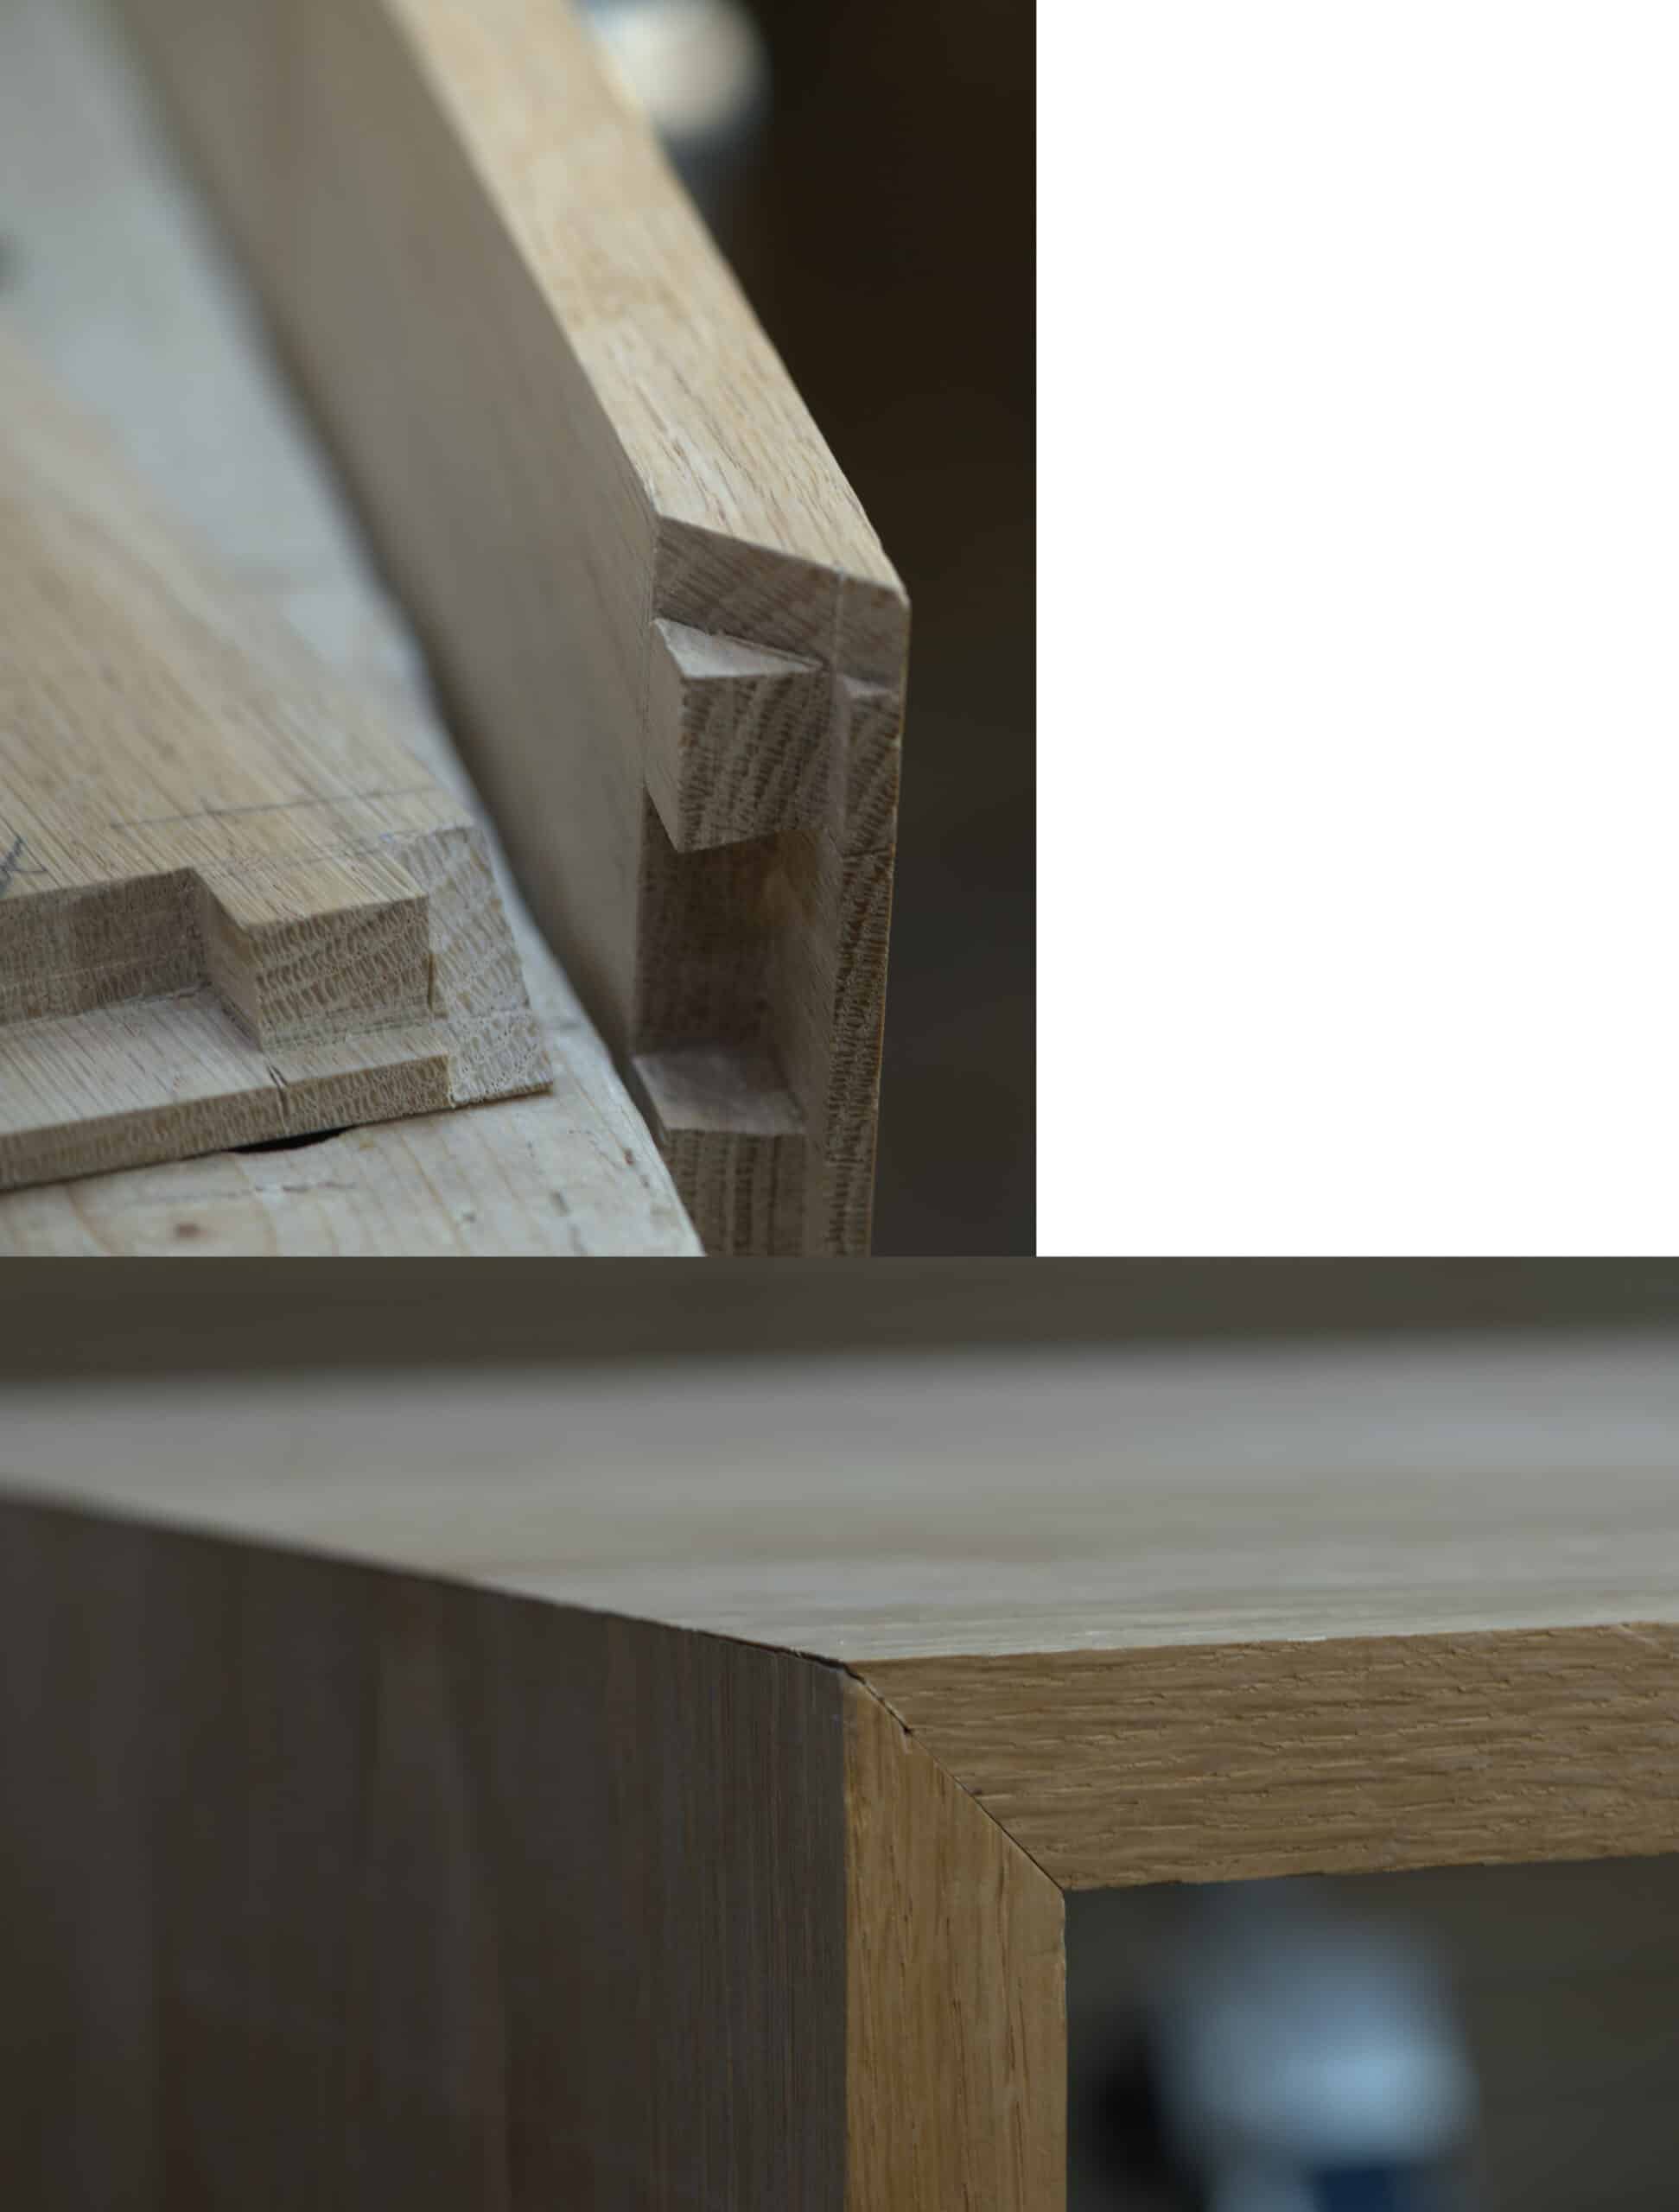 Concealed mitred dovetails